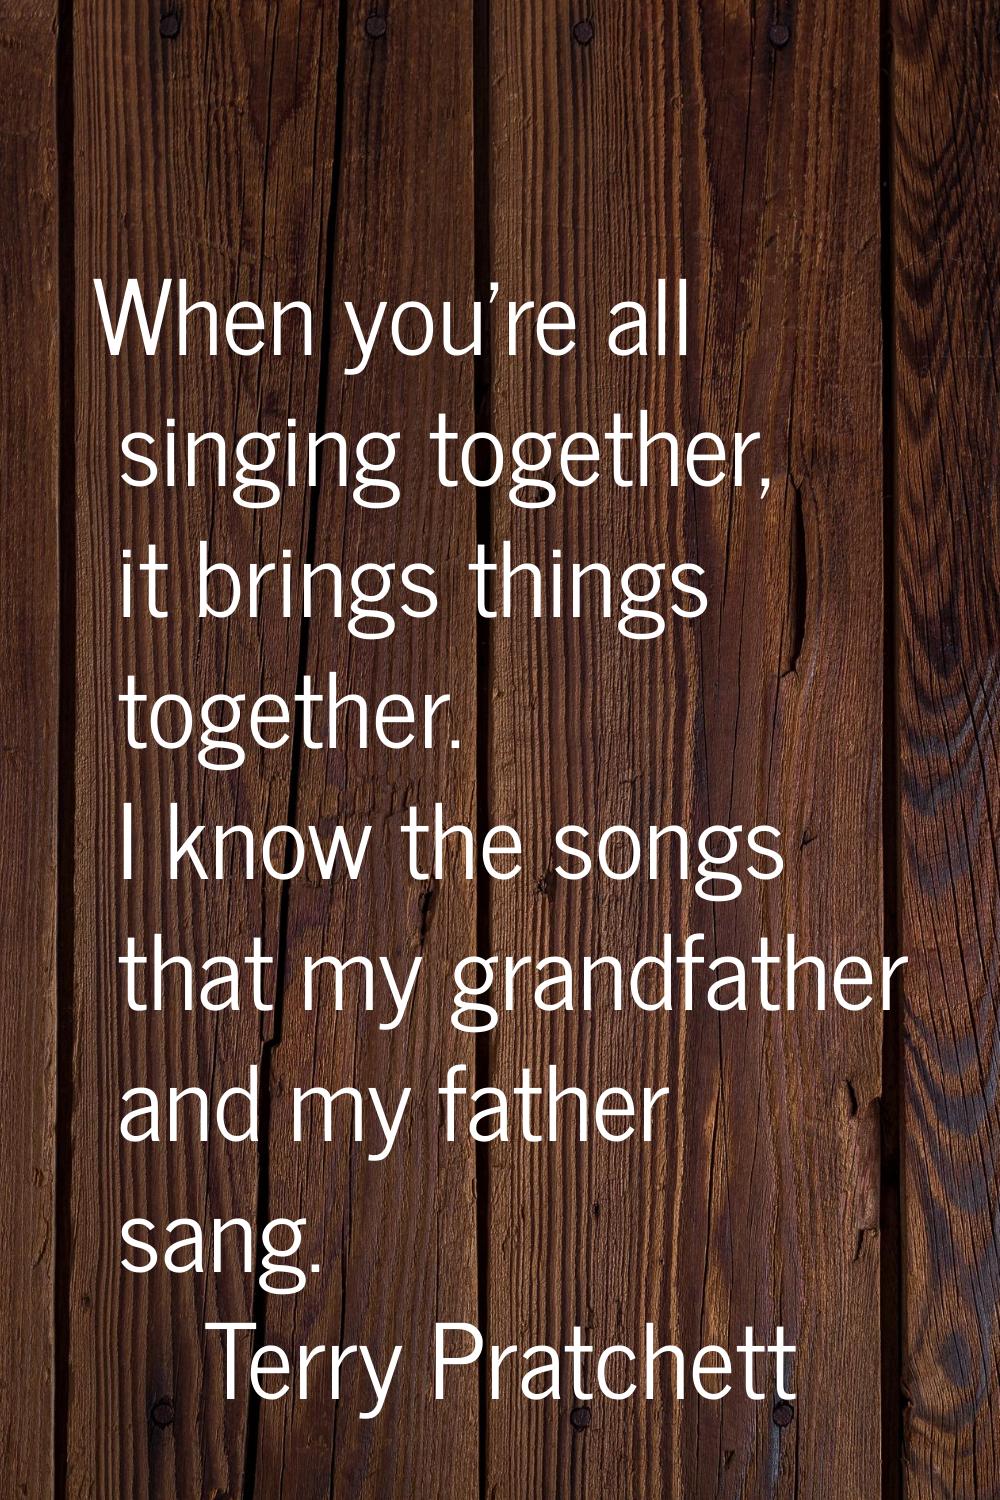 When you're all singing together, it brings things together. I know the songs that my grandfather a